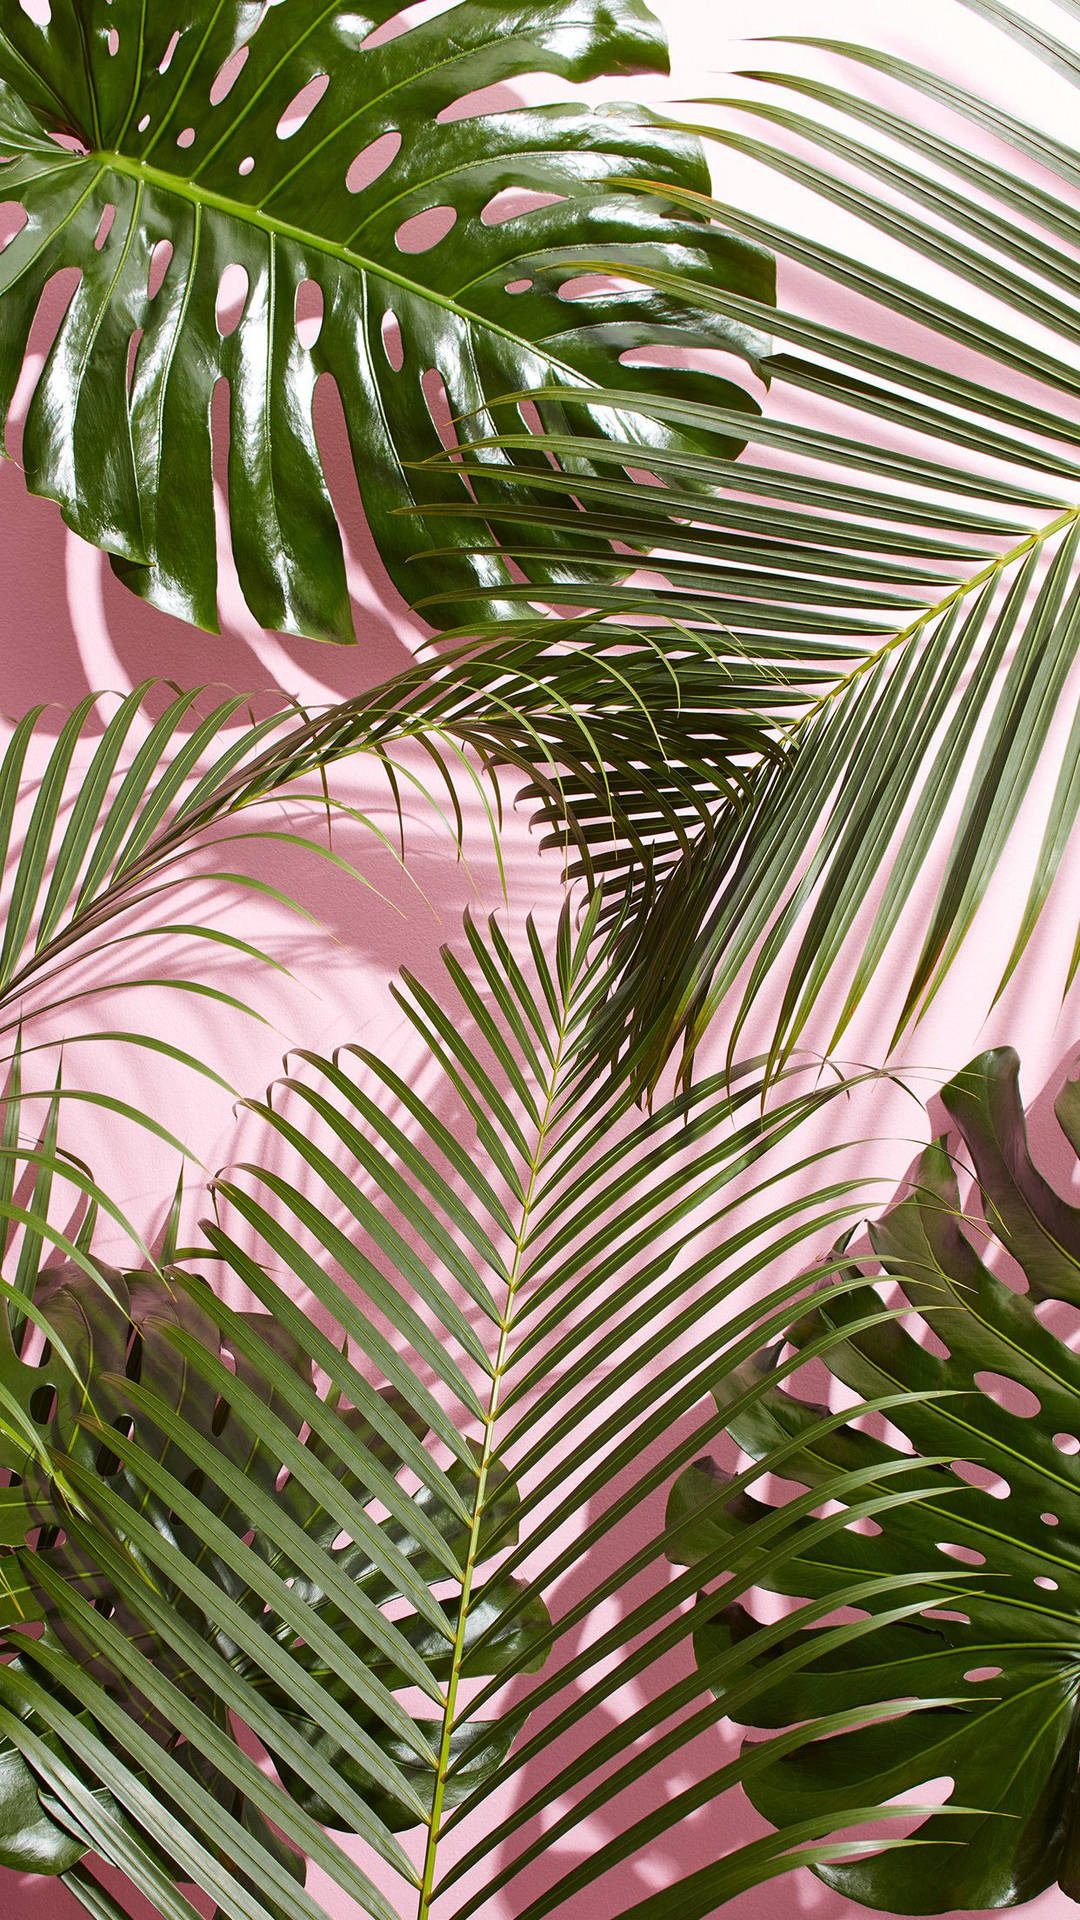 Tropical Palm Leaf, Refreshing Nature at its Best Wallpaper